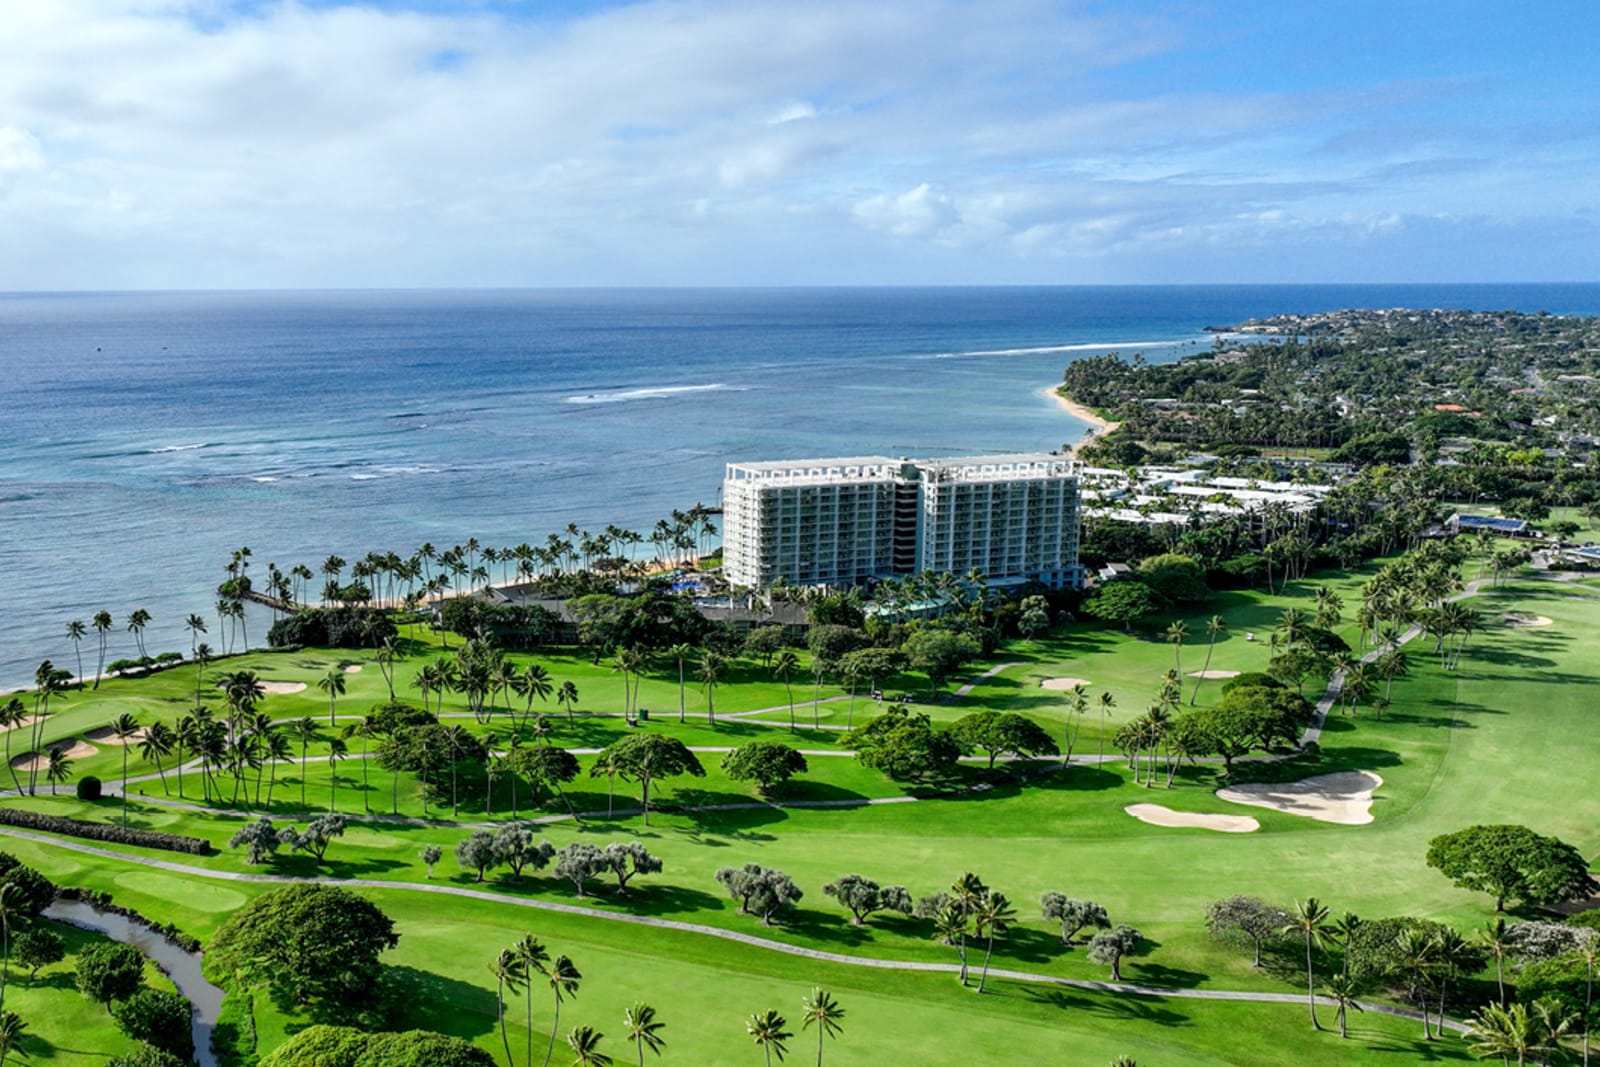 The Kahala Hotel & Resort is one of the best places to stay in Honolulu